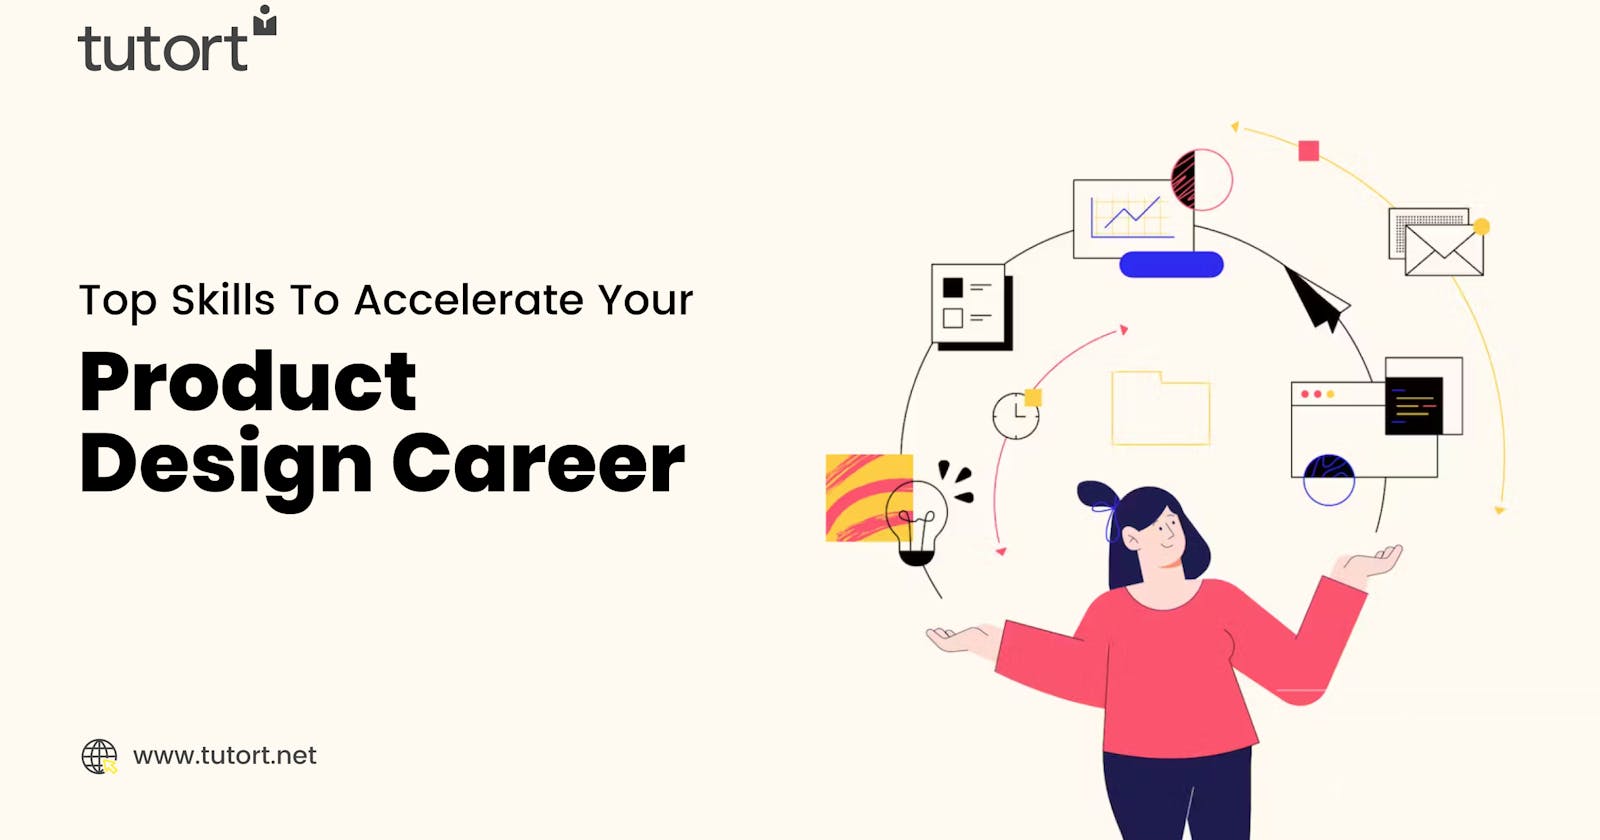 Skills To Accelerate Your Product Design Career